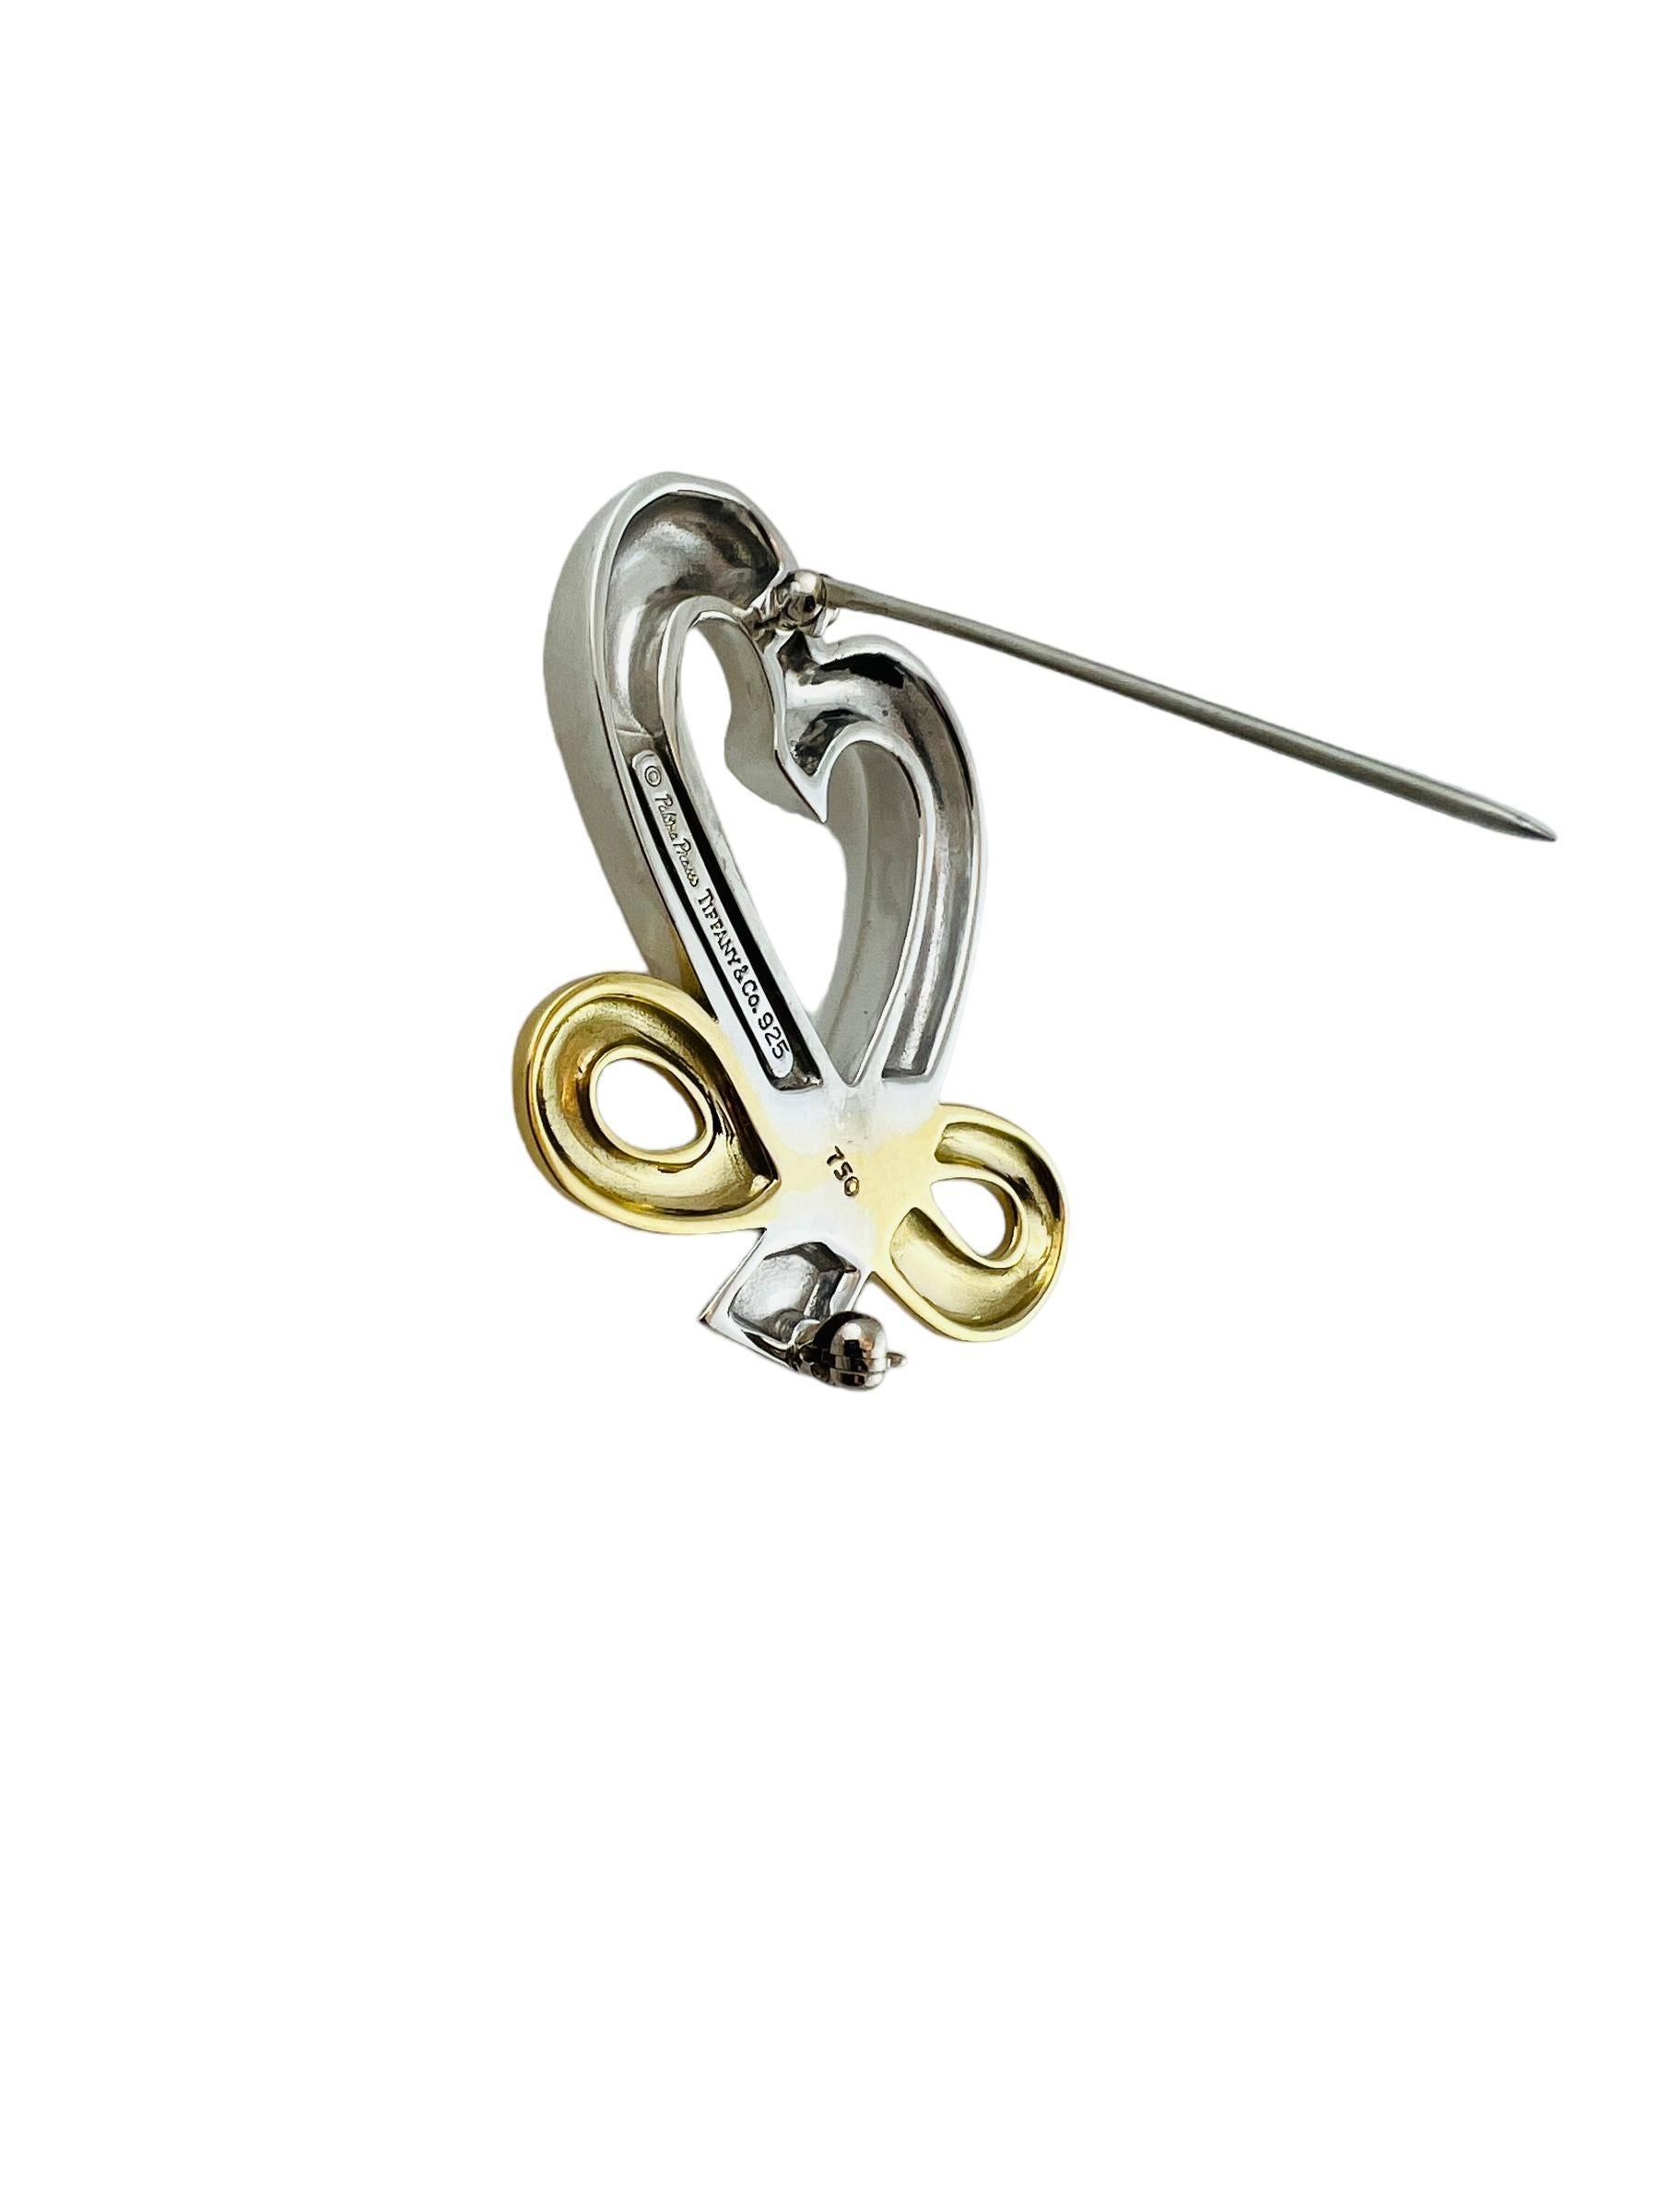 Tiffany & Co. Picasso 18K Gold Sterling Open Heart Infinity Brooch #15427 In Good Condition For Sale In Washington Depot, CT